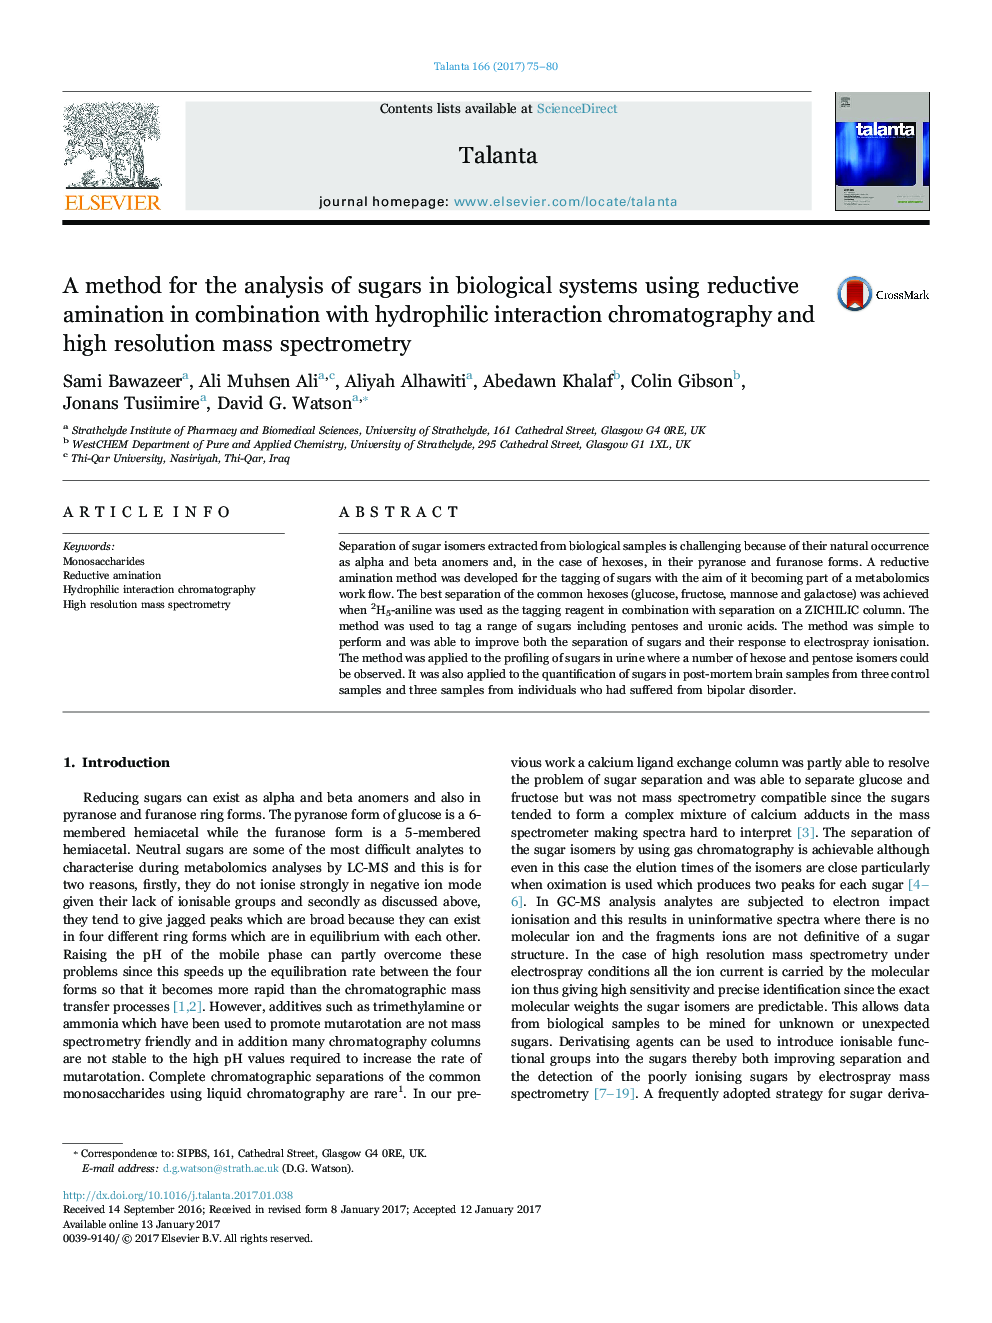 A method for the analysis of sugars in biological systems using reductive amination in combination with hydrophilic interaction chromatography and high resolution mass spectrometry